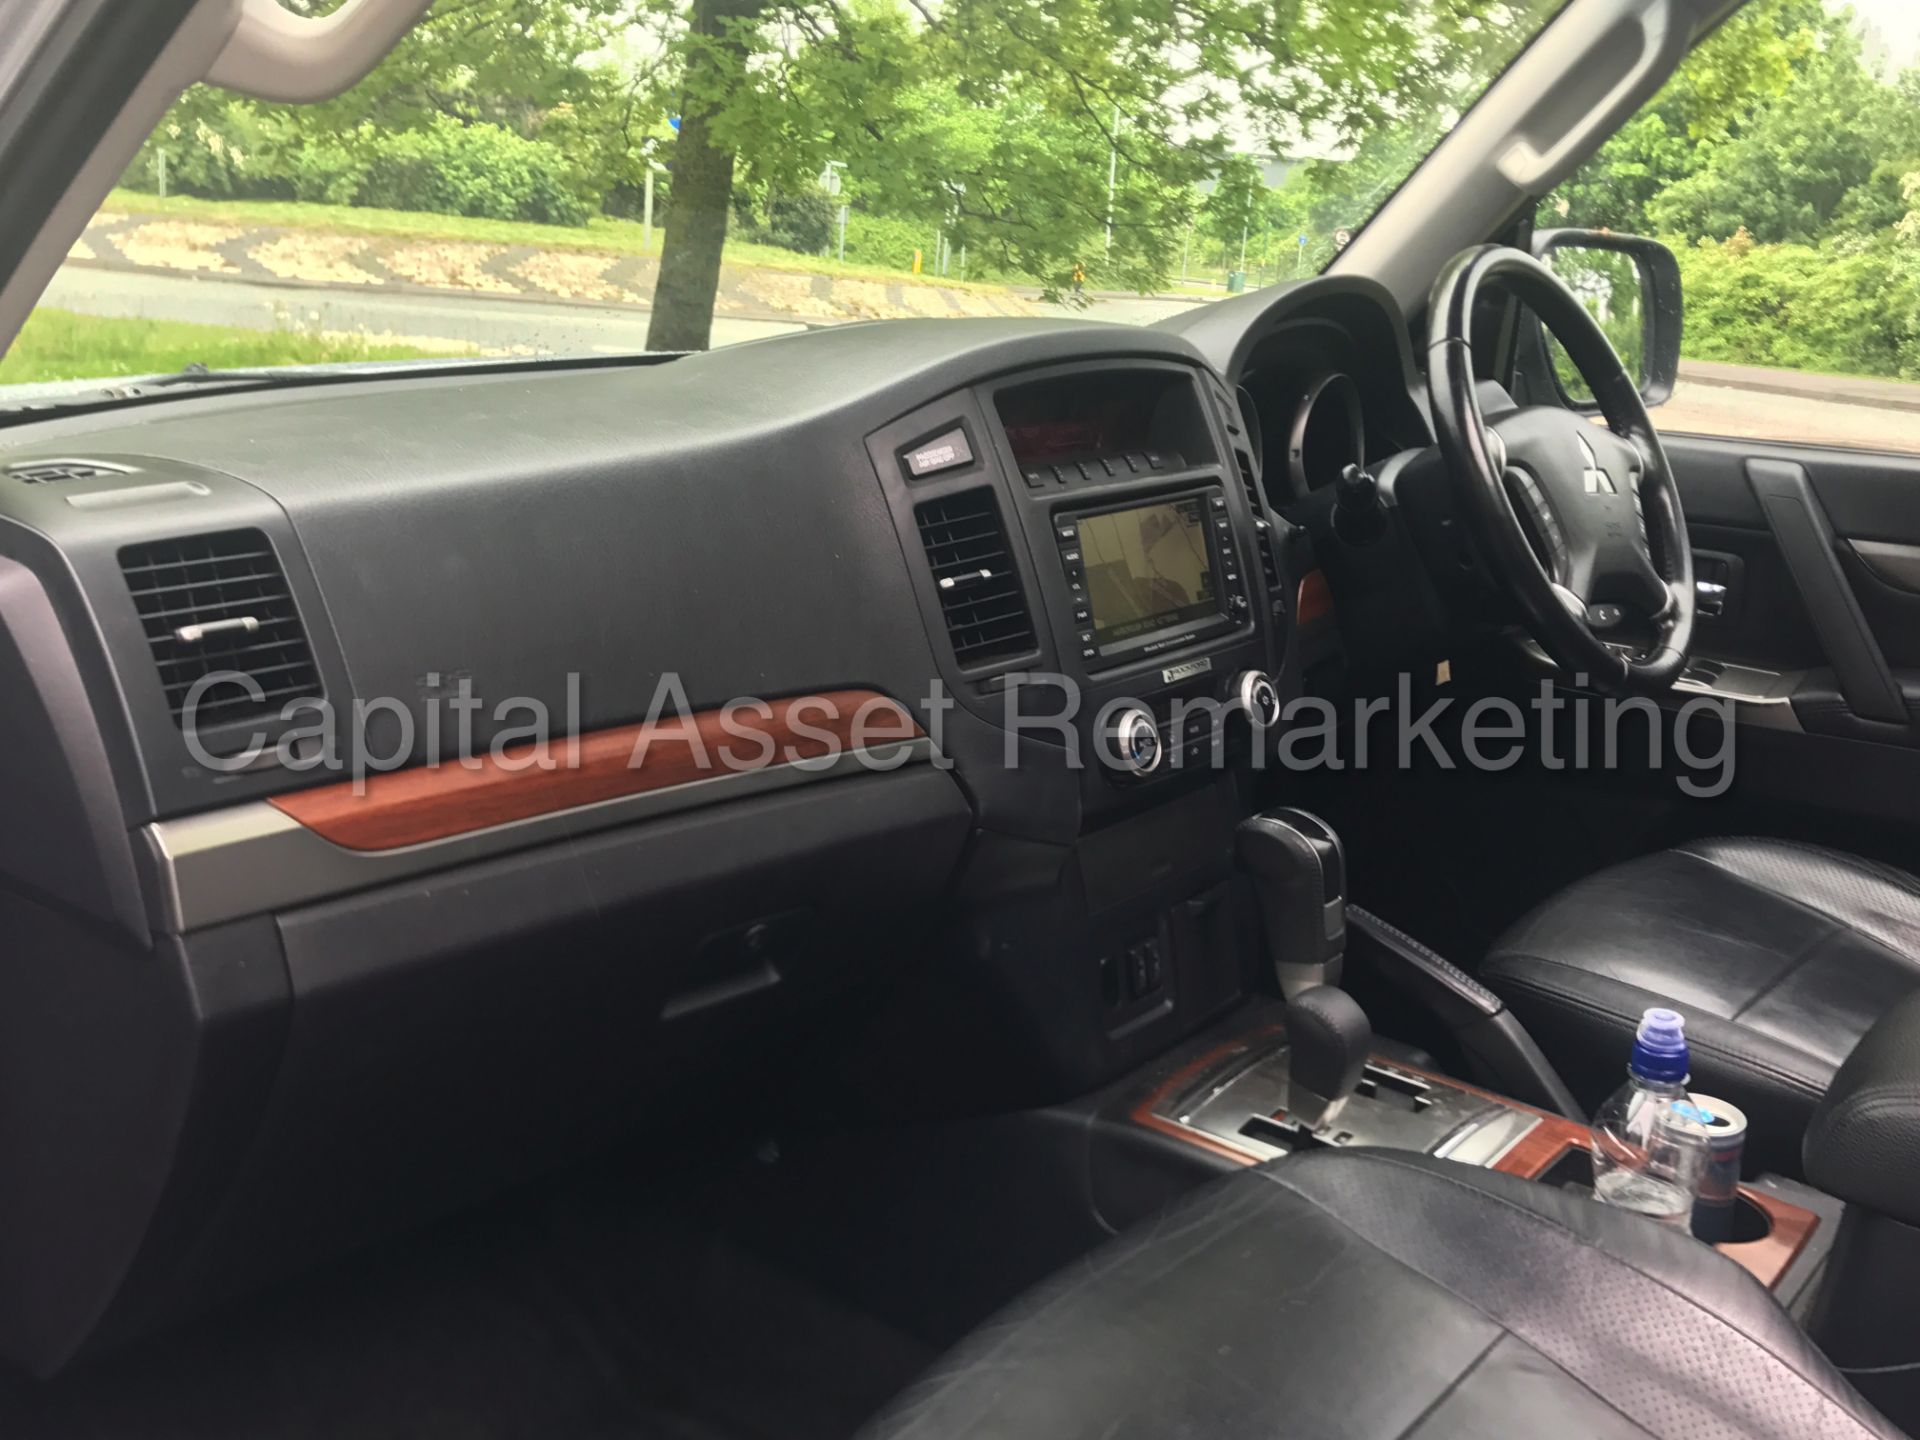 (On Sale) MITSUBISHI SHOGUN 'LWB - 7 SEATER' (2013) '3.2 DI-D - AUTO - LEATHER - SAT NAV' (1 OWNER) - Image 15 of 30